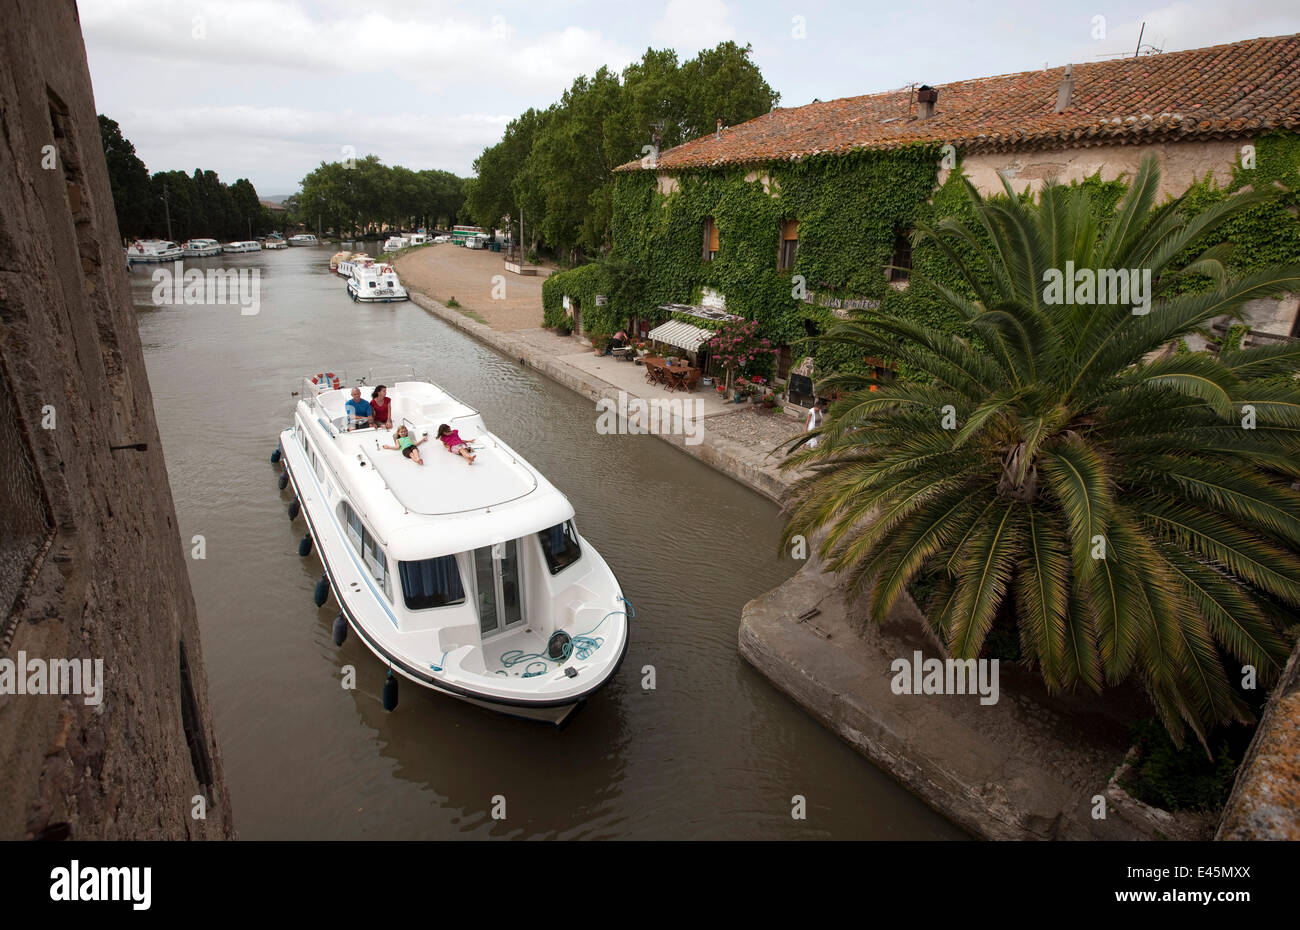 Family cruising on the Canal Du Midi around Le Somail, France. July 2009. Model released. Stock Photo